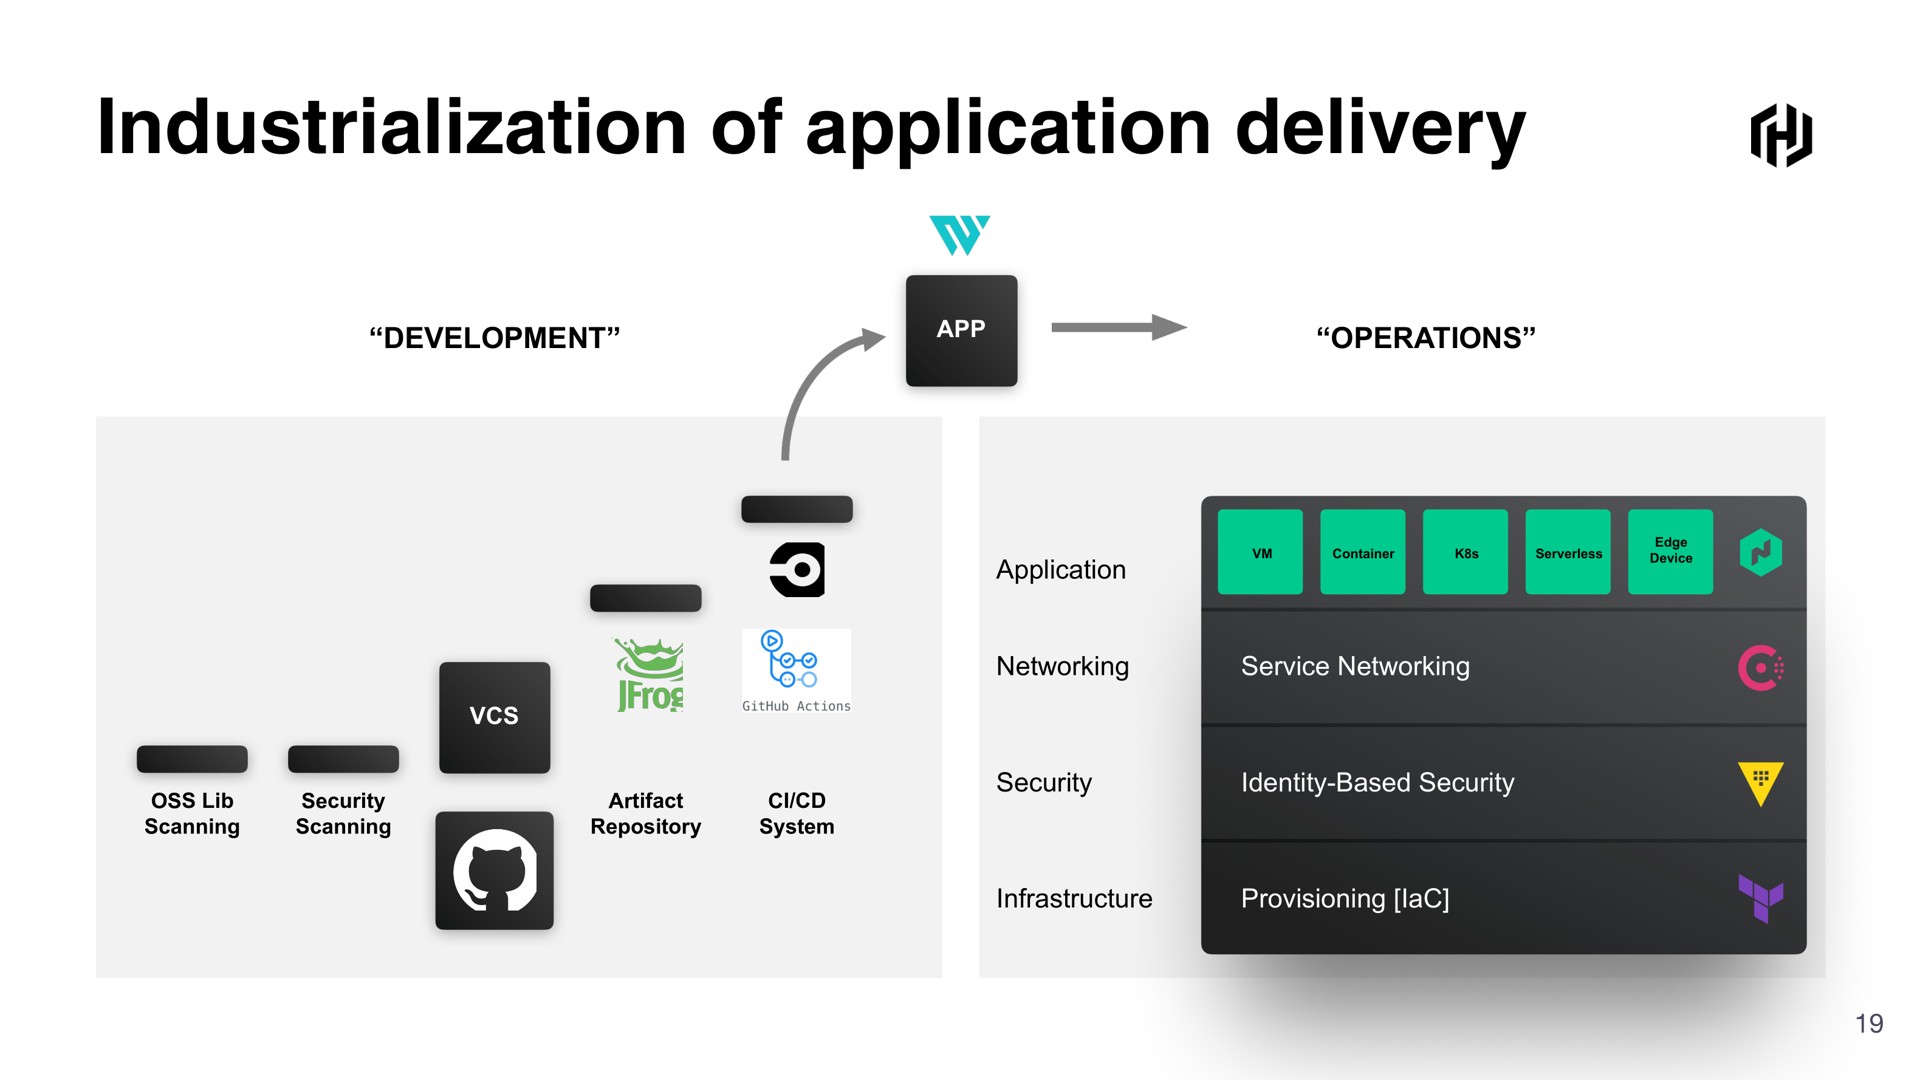 a industrialization of application delivery | HashiCorp